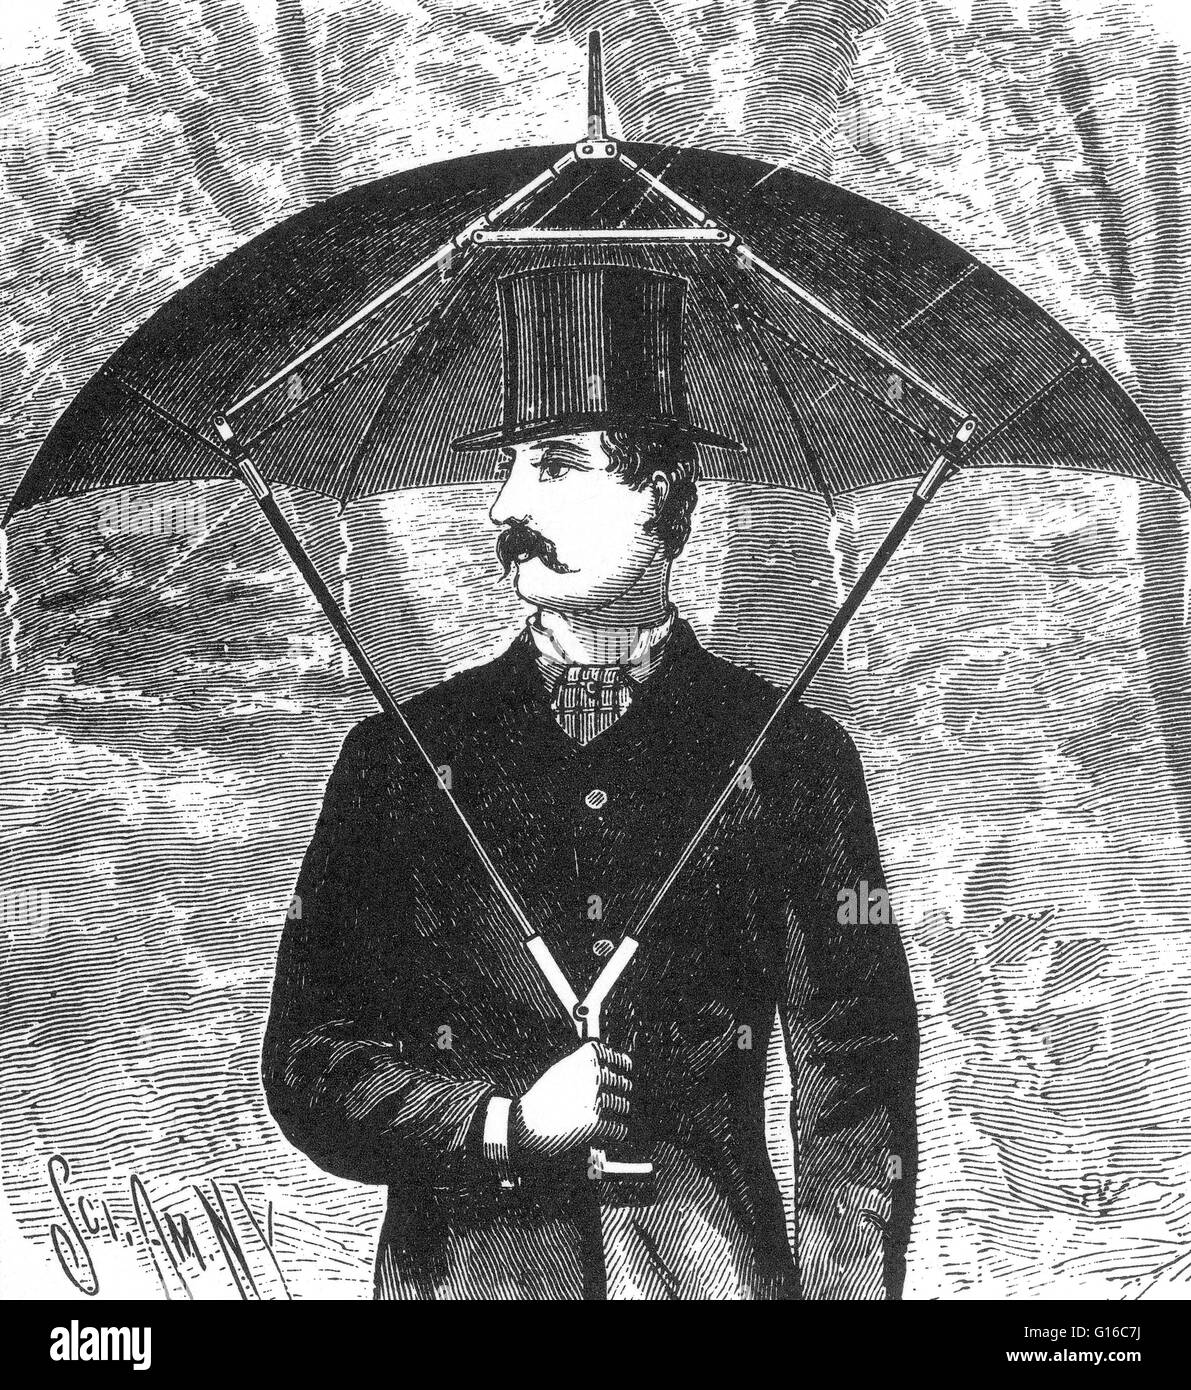 A simple umbrella designed to protect the hat. An umbrella is a light, small, portable, usually circular cover for protection from rain or sun, consisting of a fabric held on a collapsible frame of thin ribs radiating from the top of a carrying stick or h Stock Photo